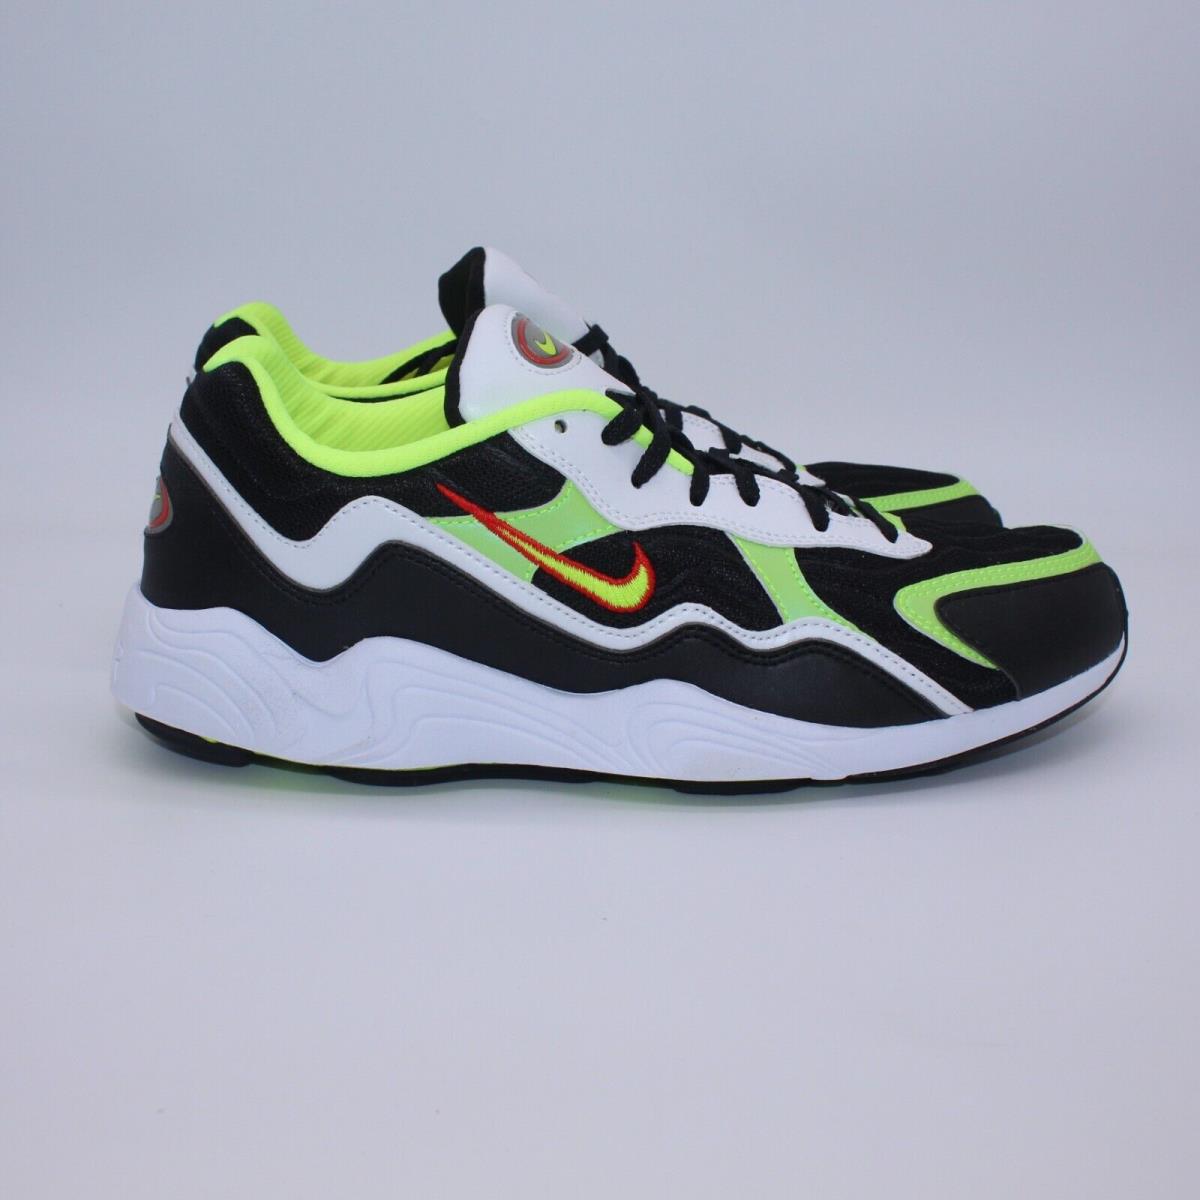 Nike shoes Air Zoom Alpha - White, black, volt, habanero red 3